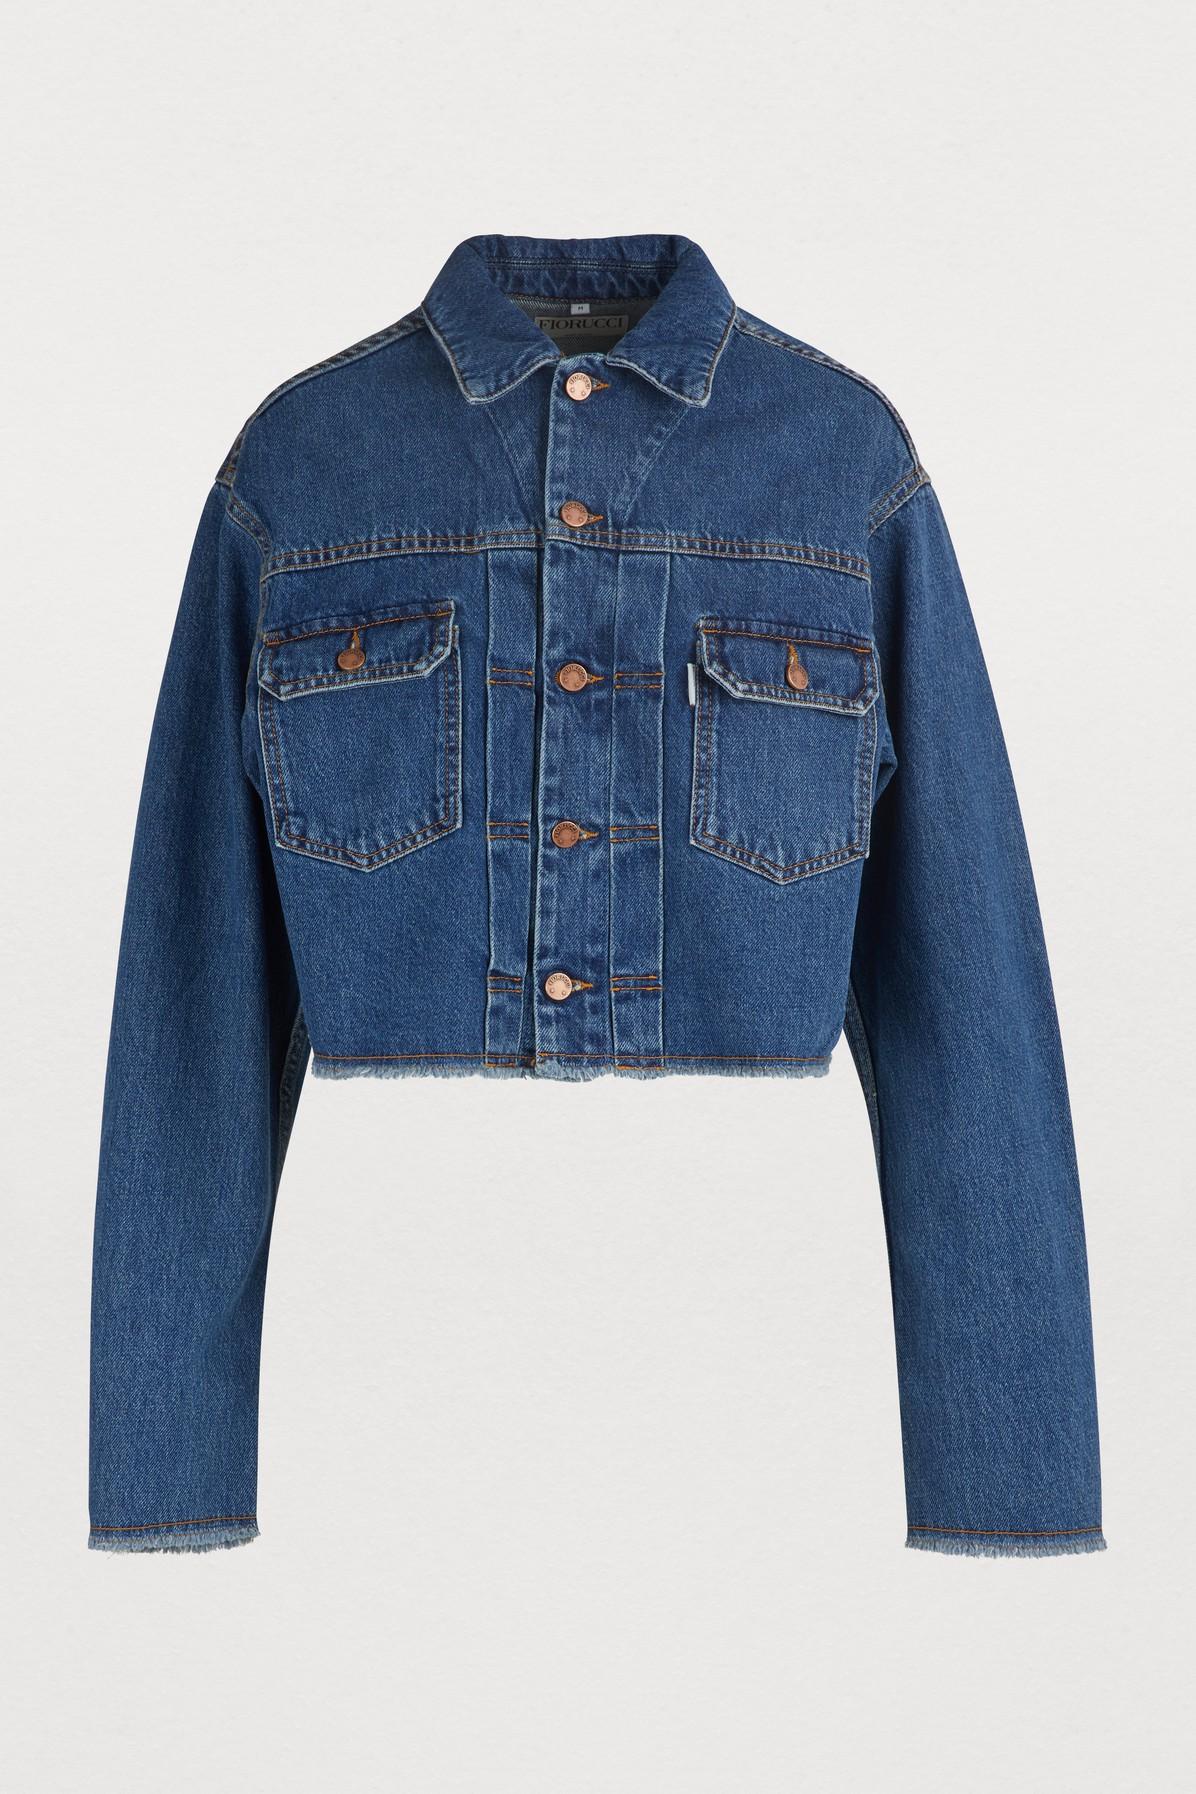 Fiorucci Denim Jacket With Angels Patch in Blue - Lyst